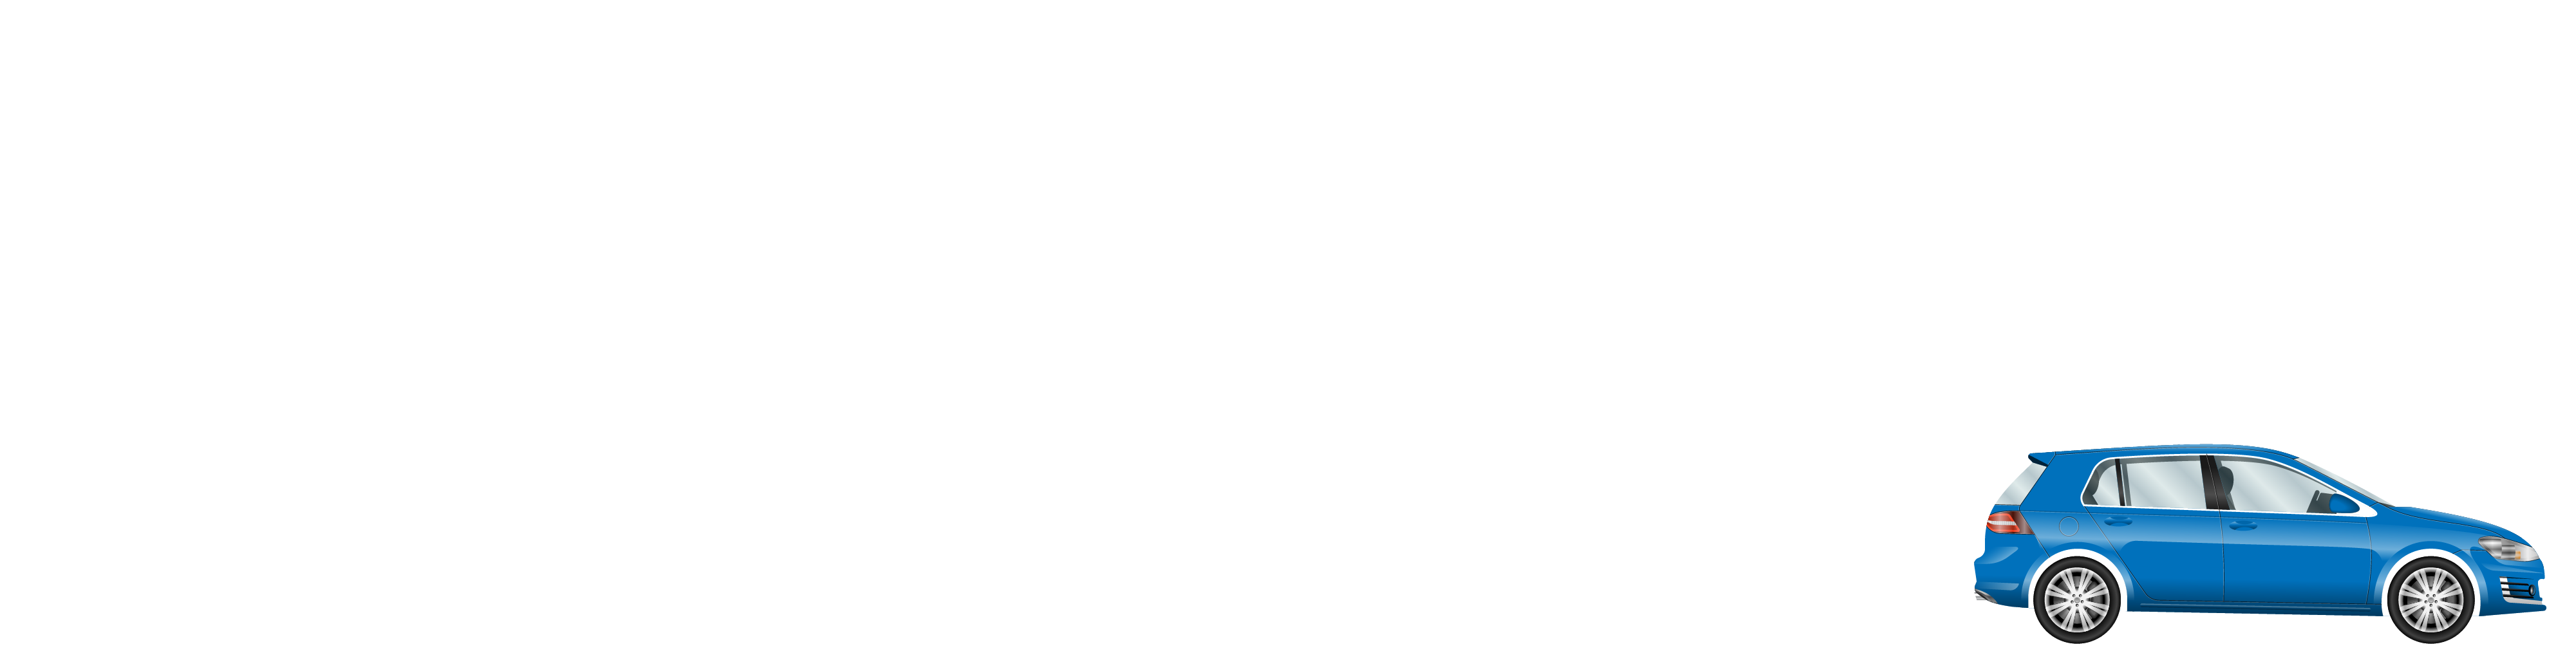 Car driving through City background image